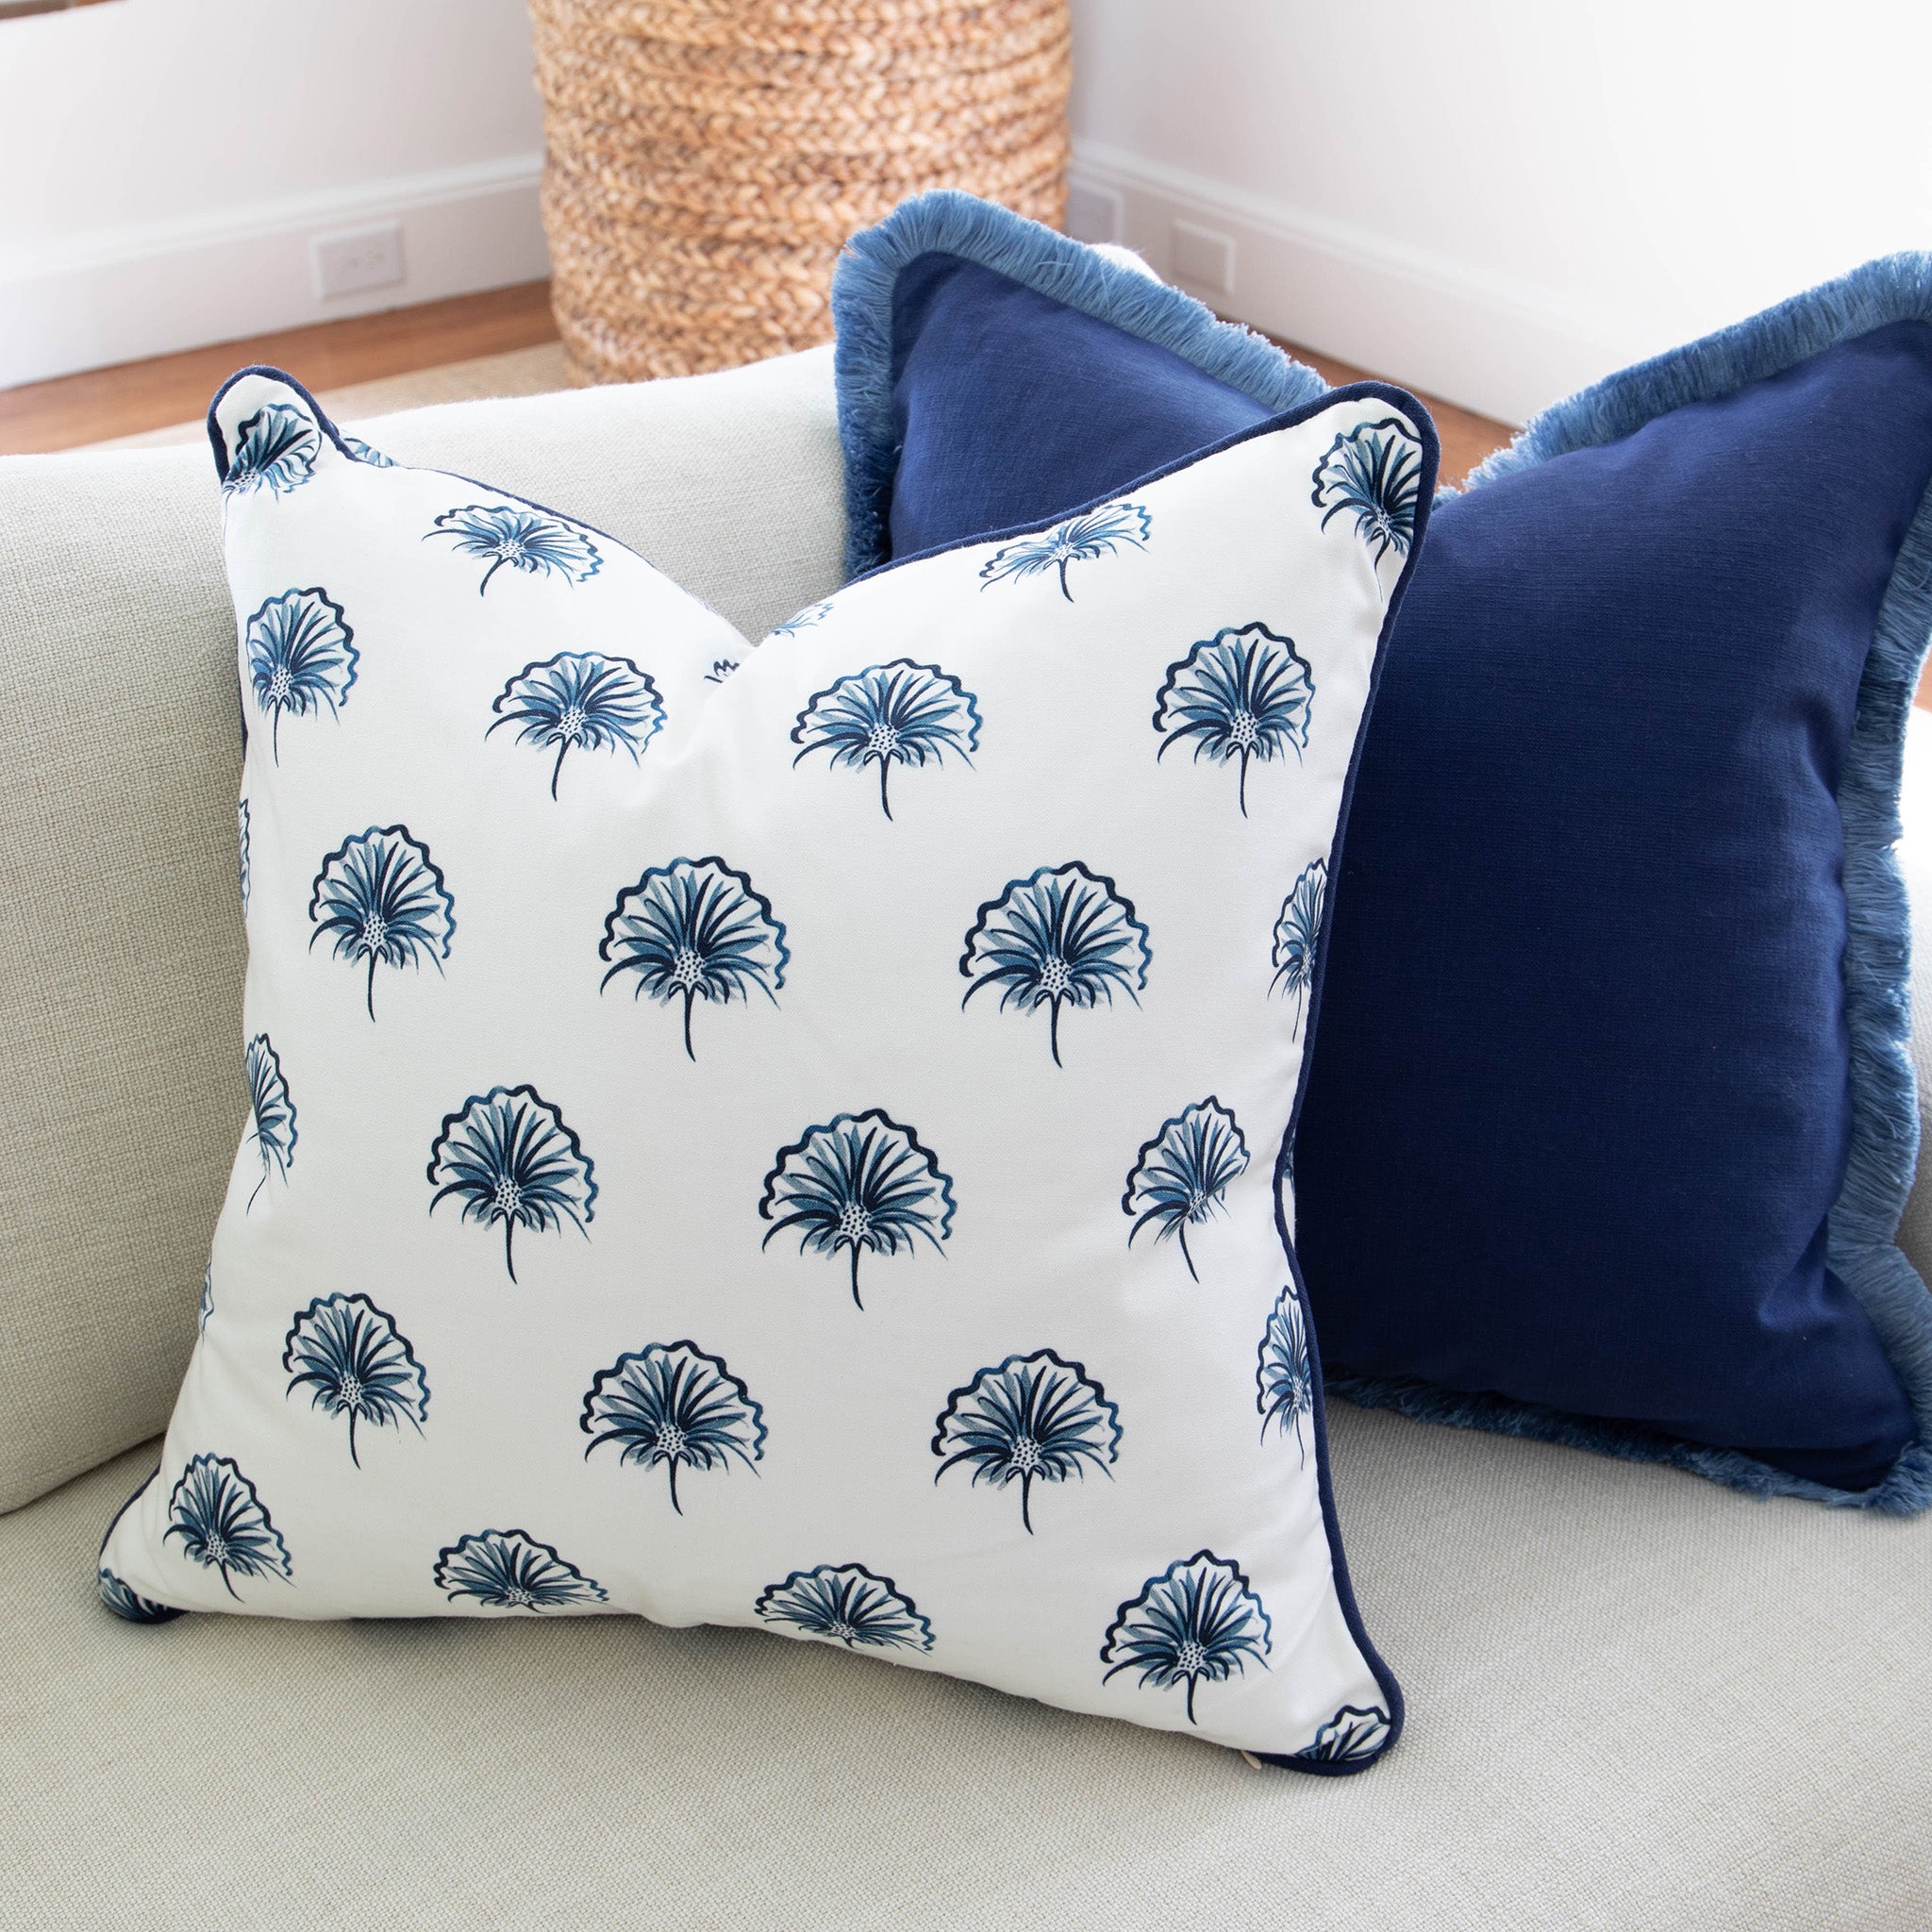 Couch close-up with Navy Blue Pillow with navy fringe and Floral Navy Printed Pillow with Navy Piping